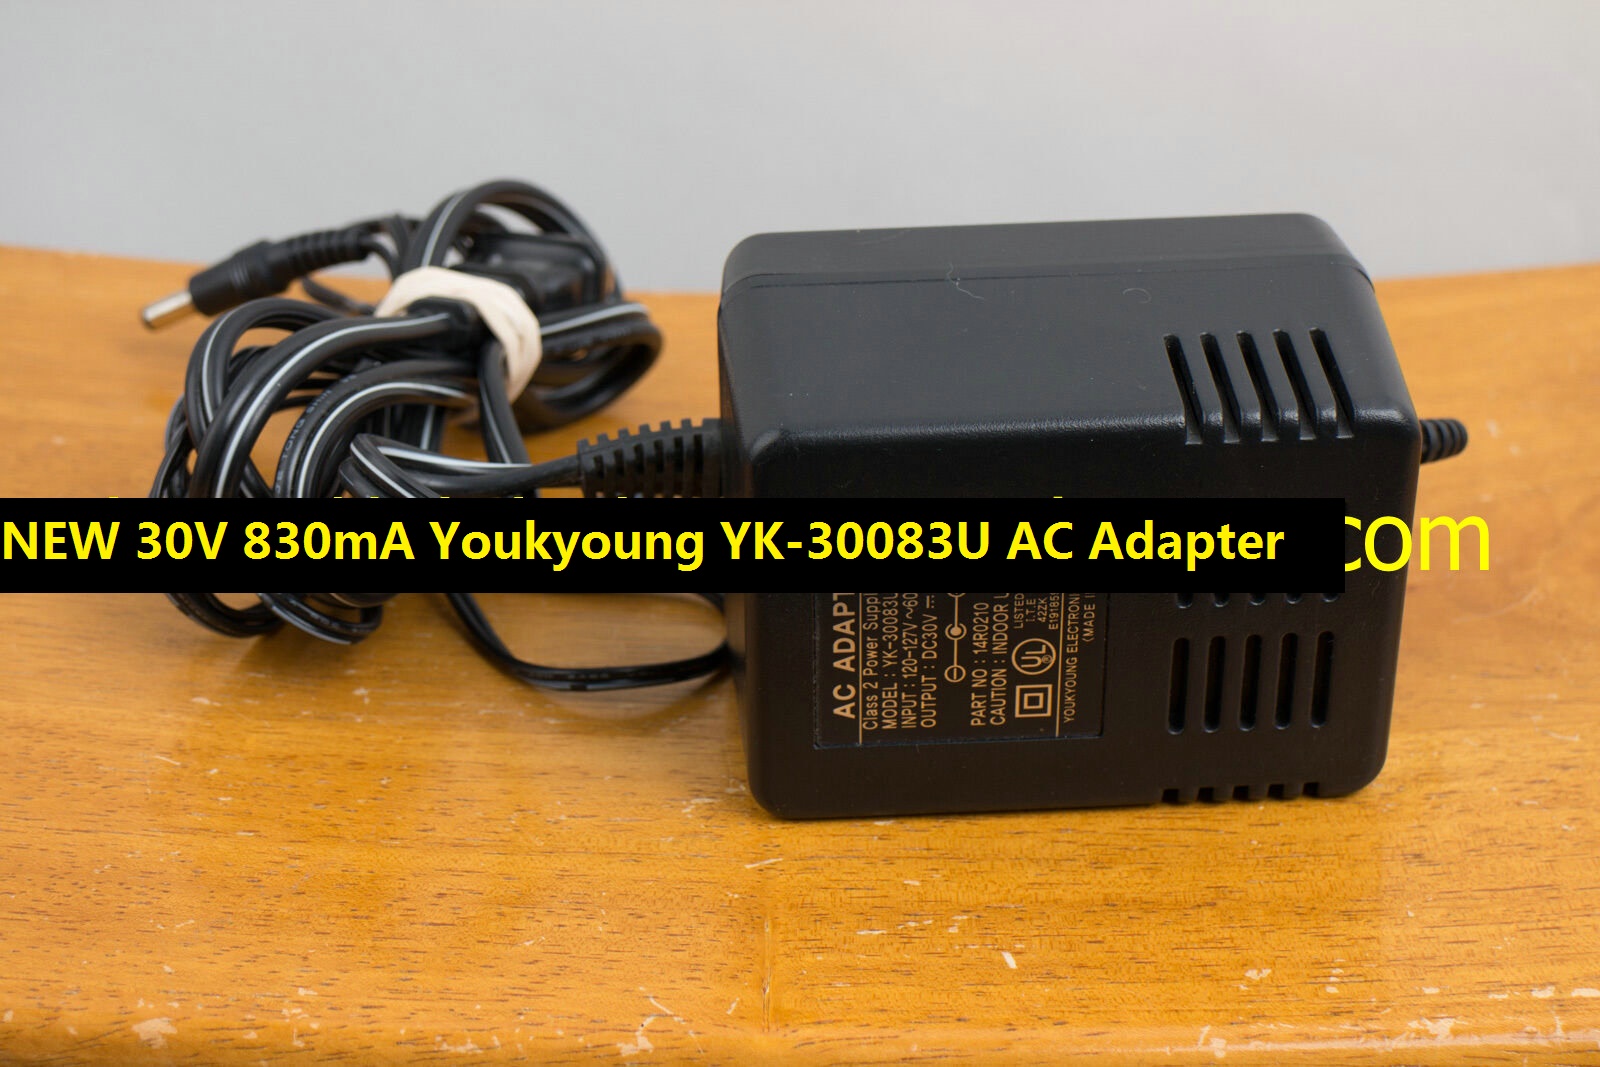 *100% Brand NEW* 30V 830mA AC Adapter 14R0210 Youkyoung YK-30083U Power Supply - Click Image to Close